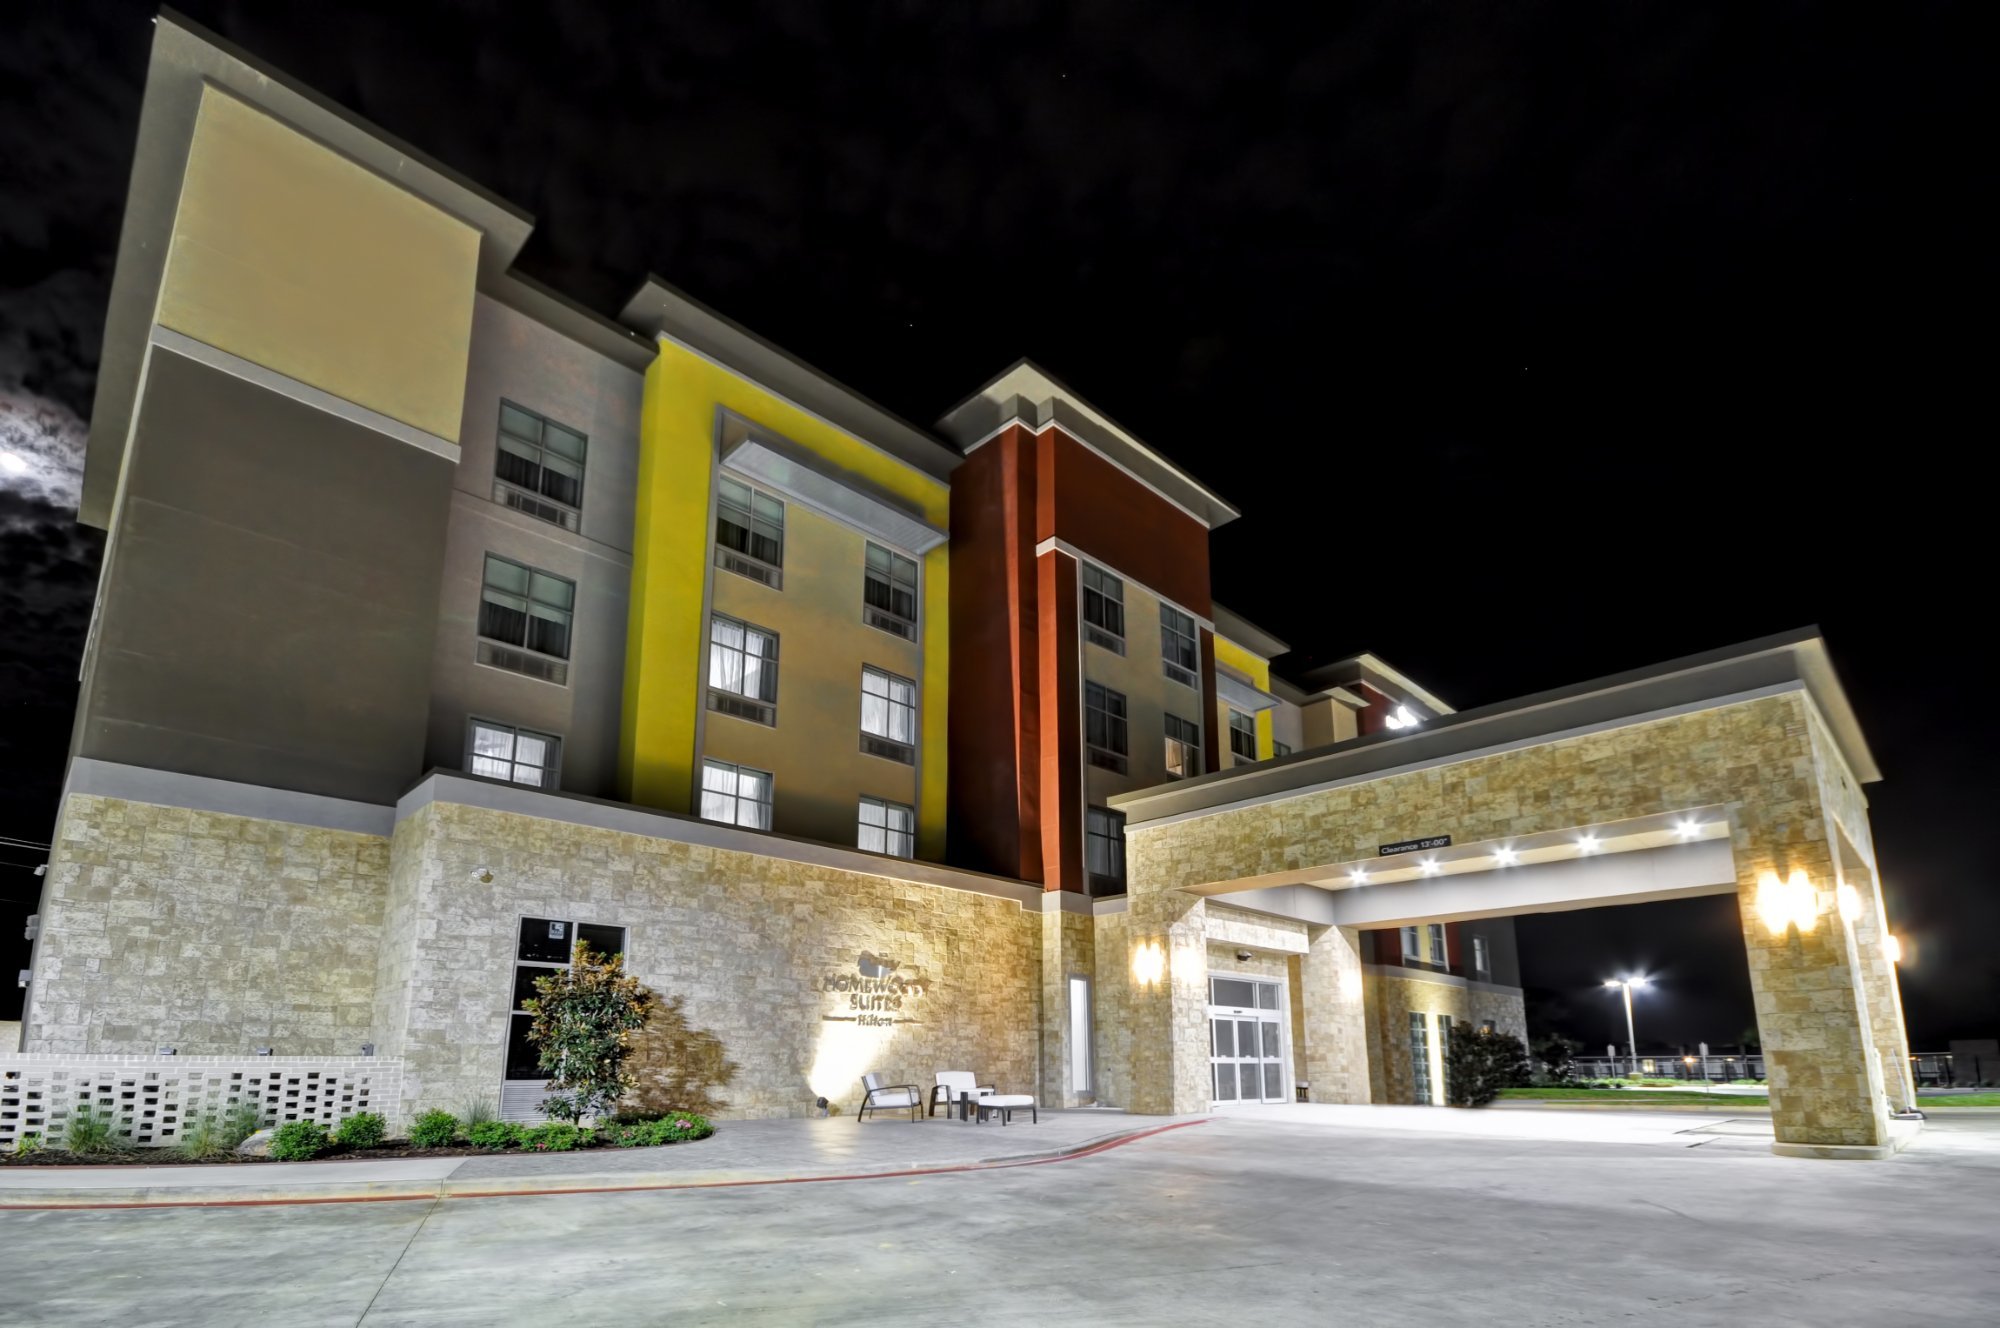 Photo of Homewood Suites by Hilton Tyler, Tyler, TX